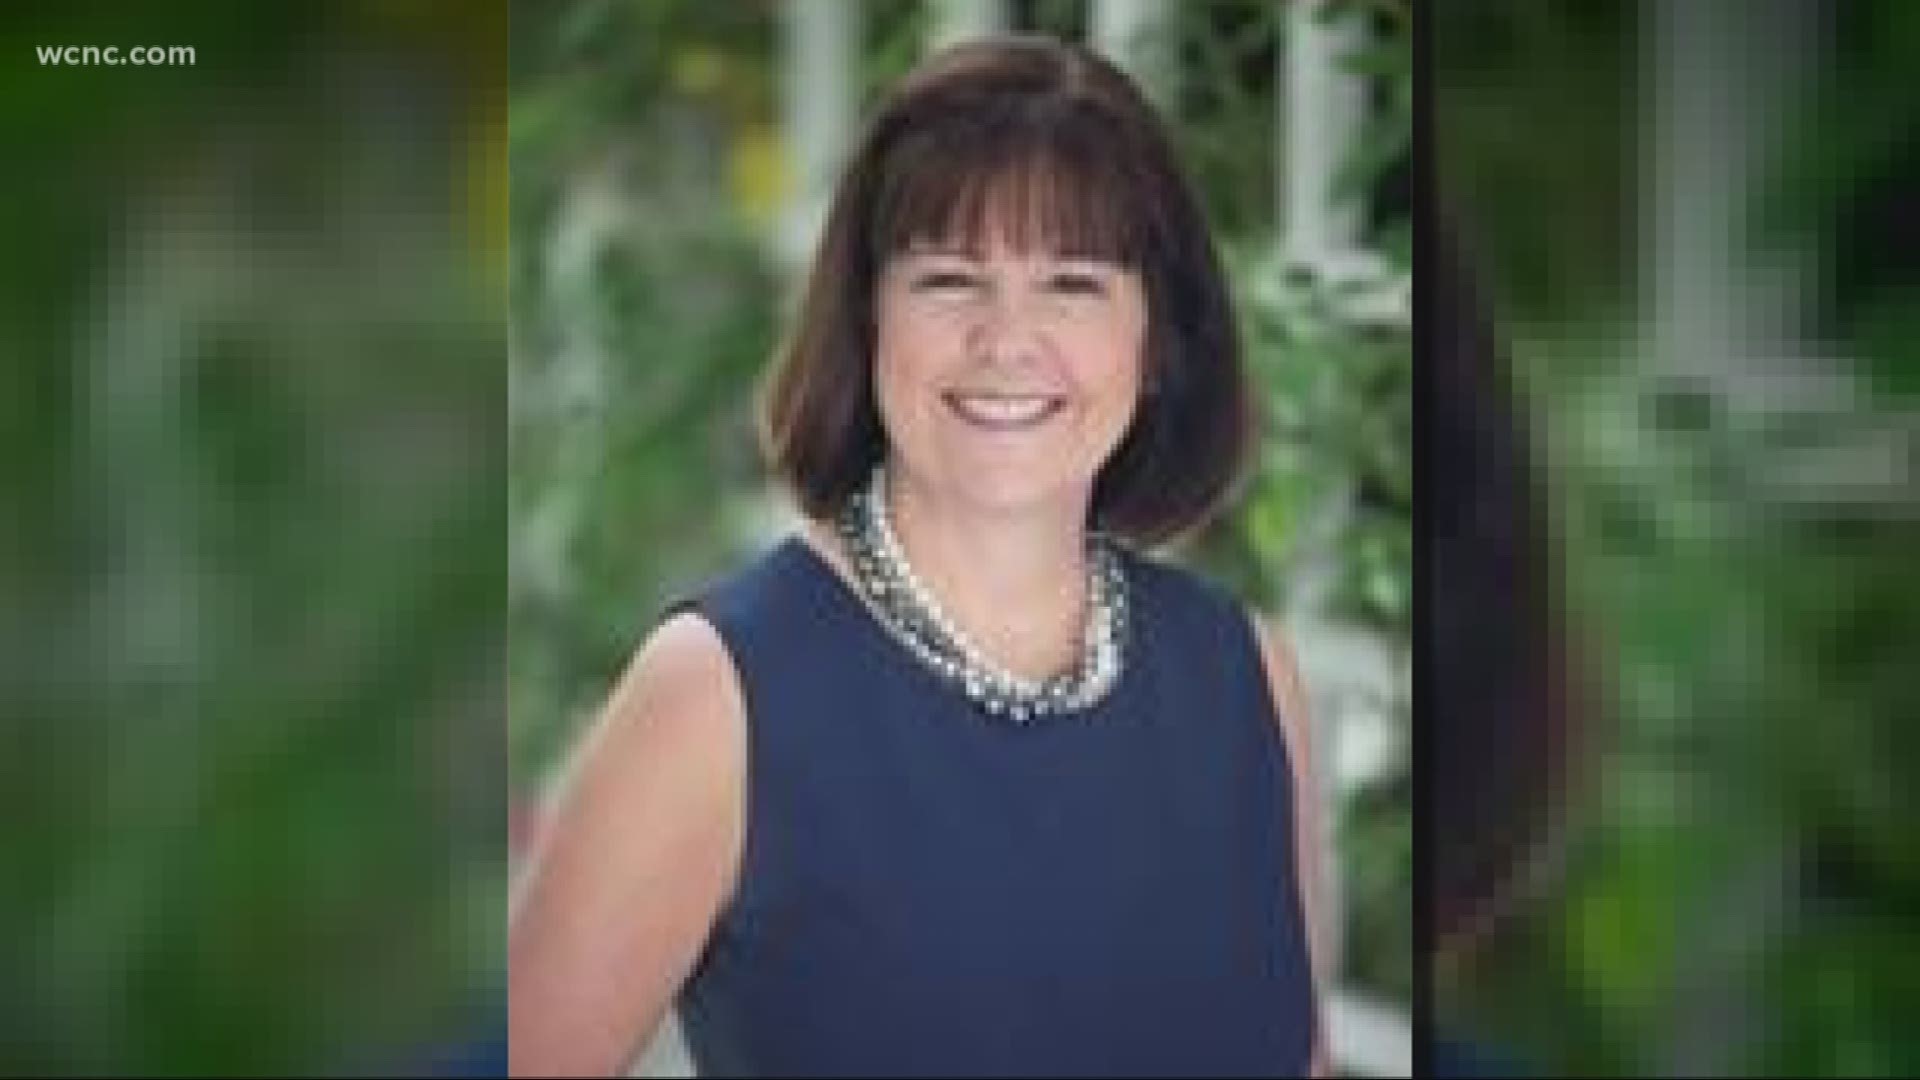 Vice President Mike Pence's wife, Karen, is making a trip to the Queen City Monday to show support for GOP congressional candidate Mark Harris.